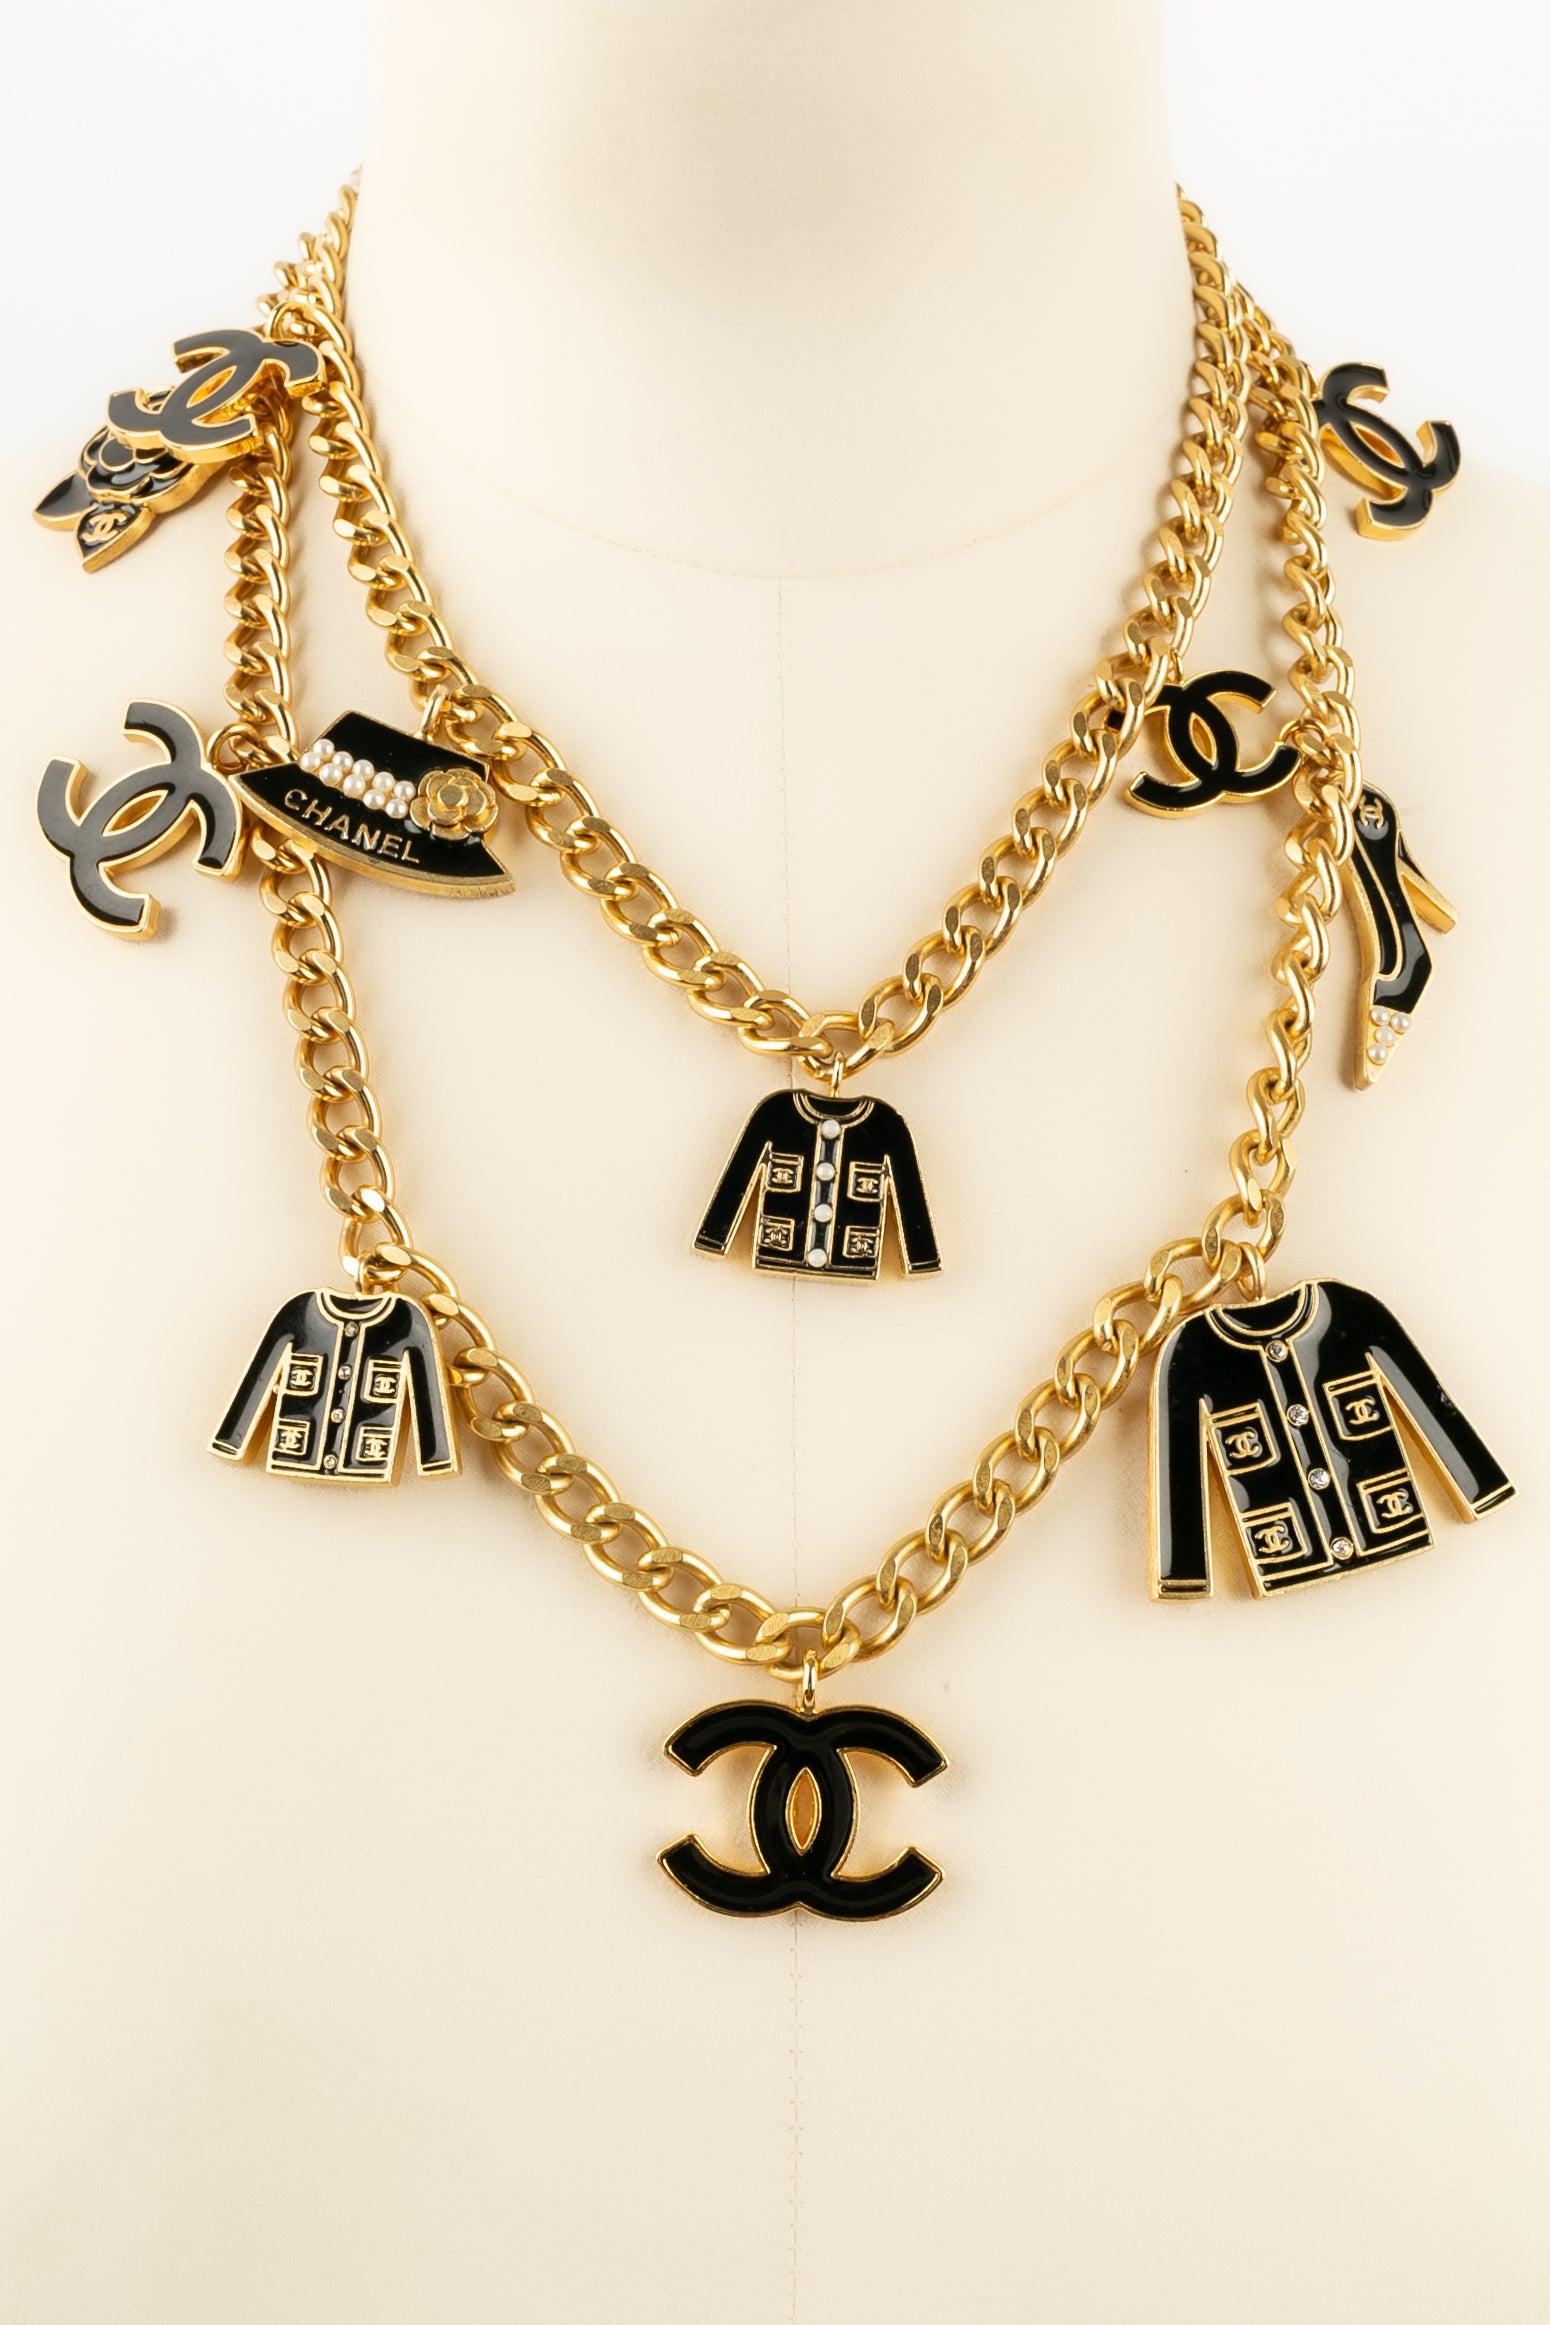 Chanel Long Necklace in Gold-Plated Metal and Charms, 2002 For Sale 5